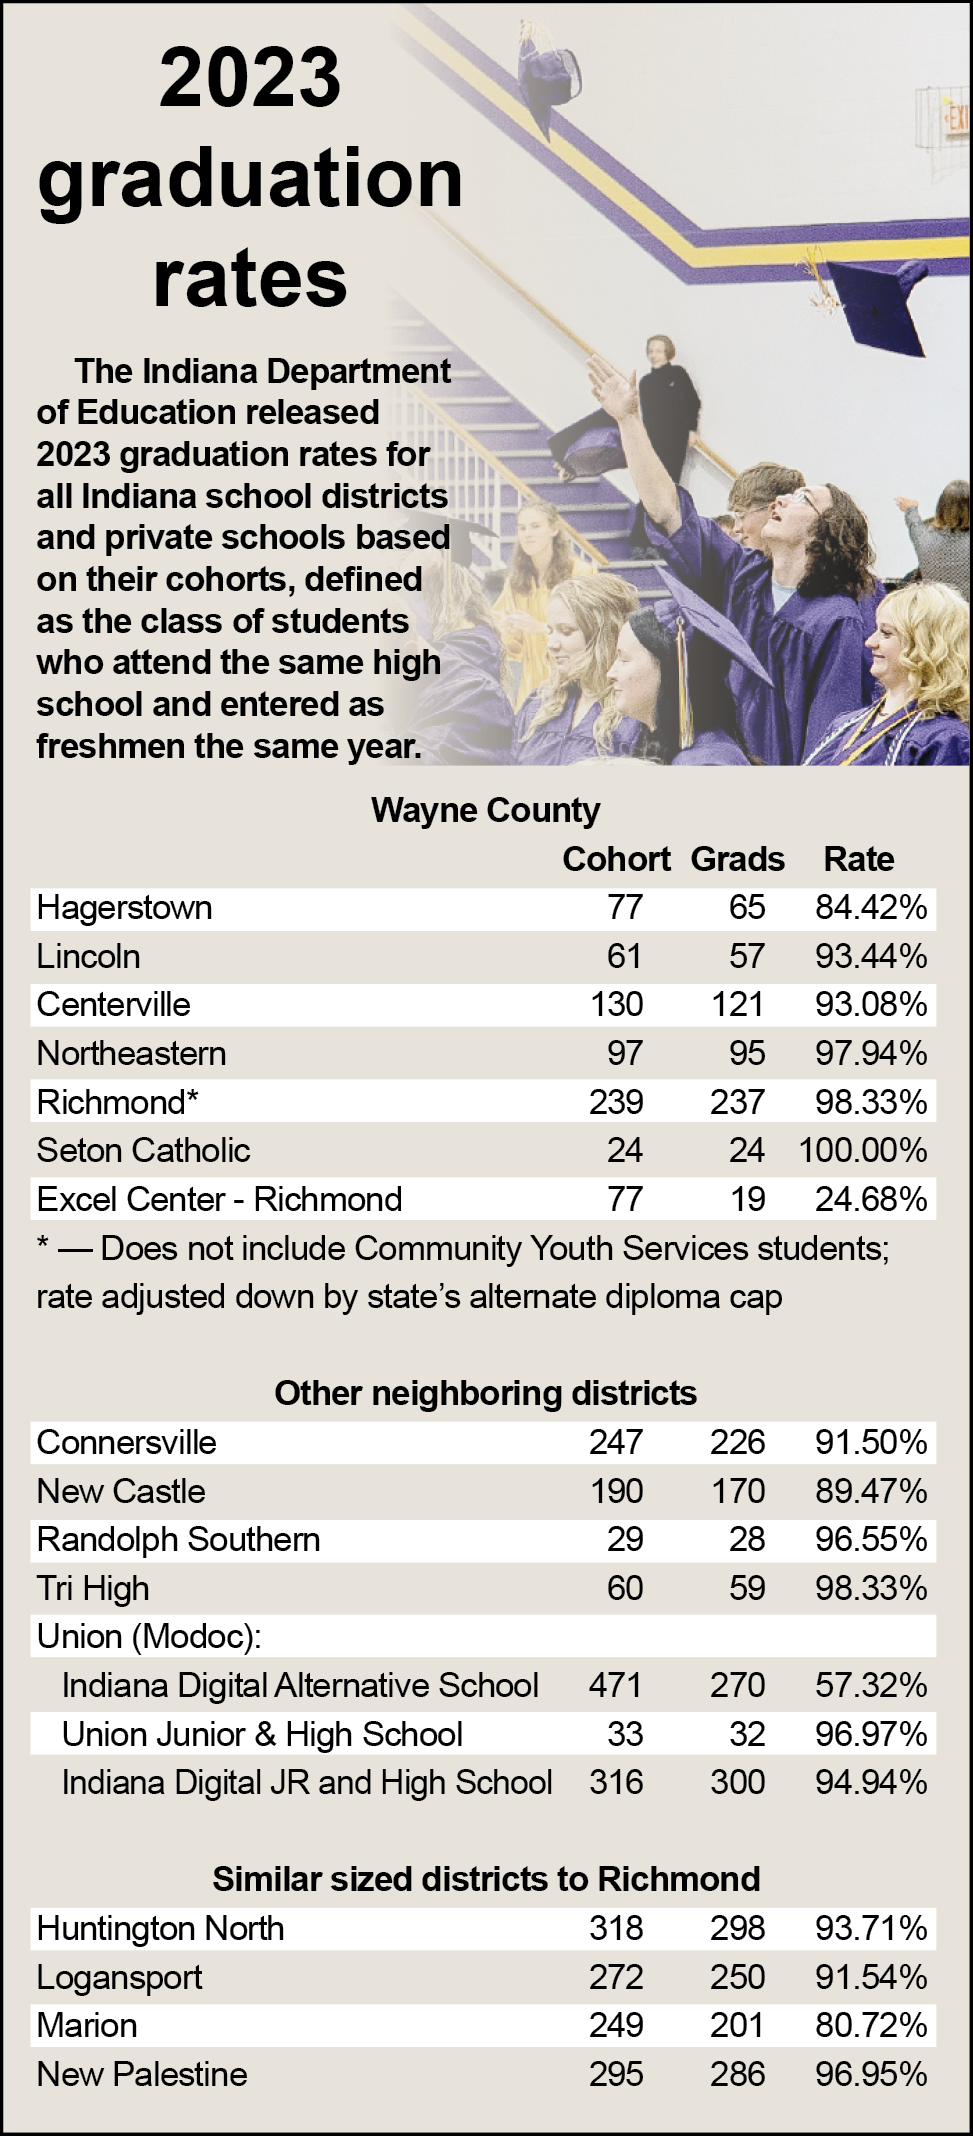 A chart of 2023 graduation rates for Wayne County, Indiana schools